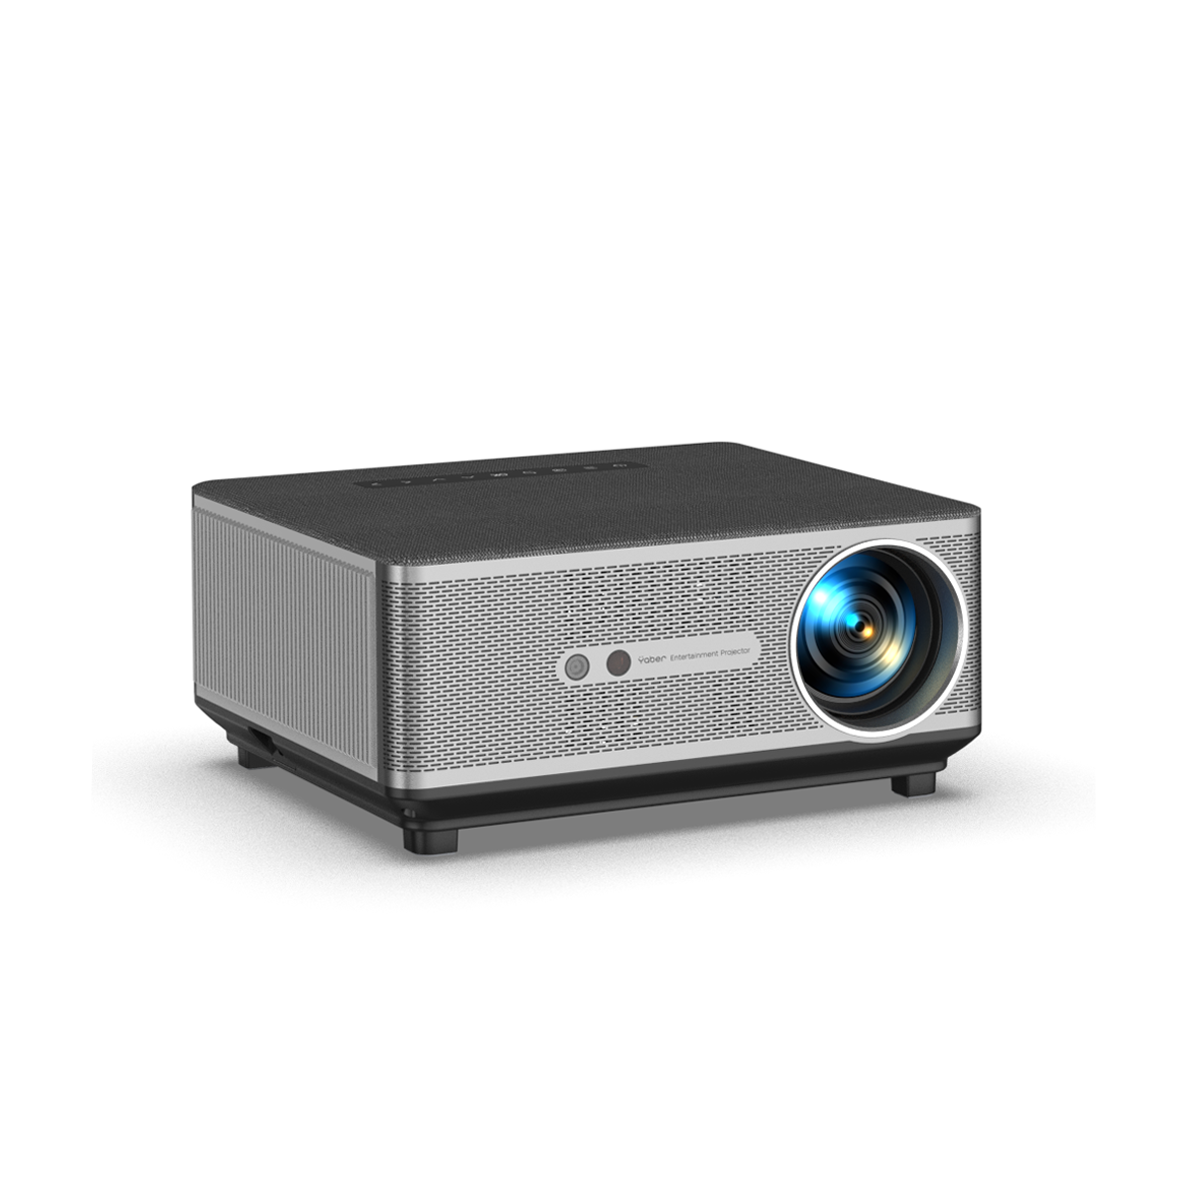 YABER PROJECTOR K1 - YABER Entertainment Projector